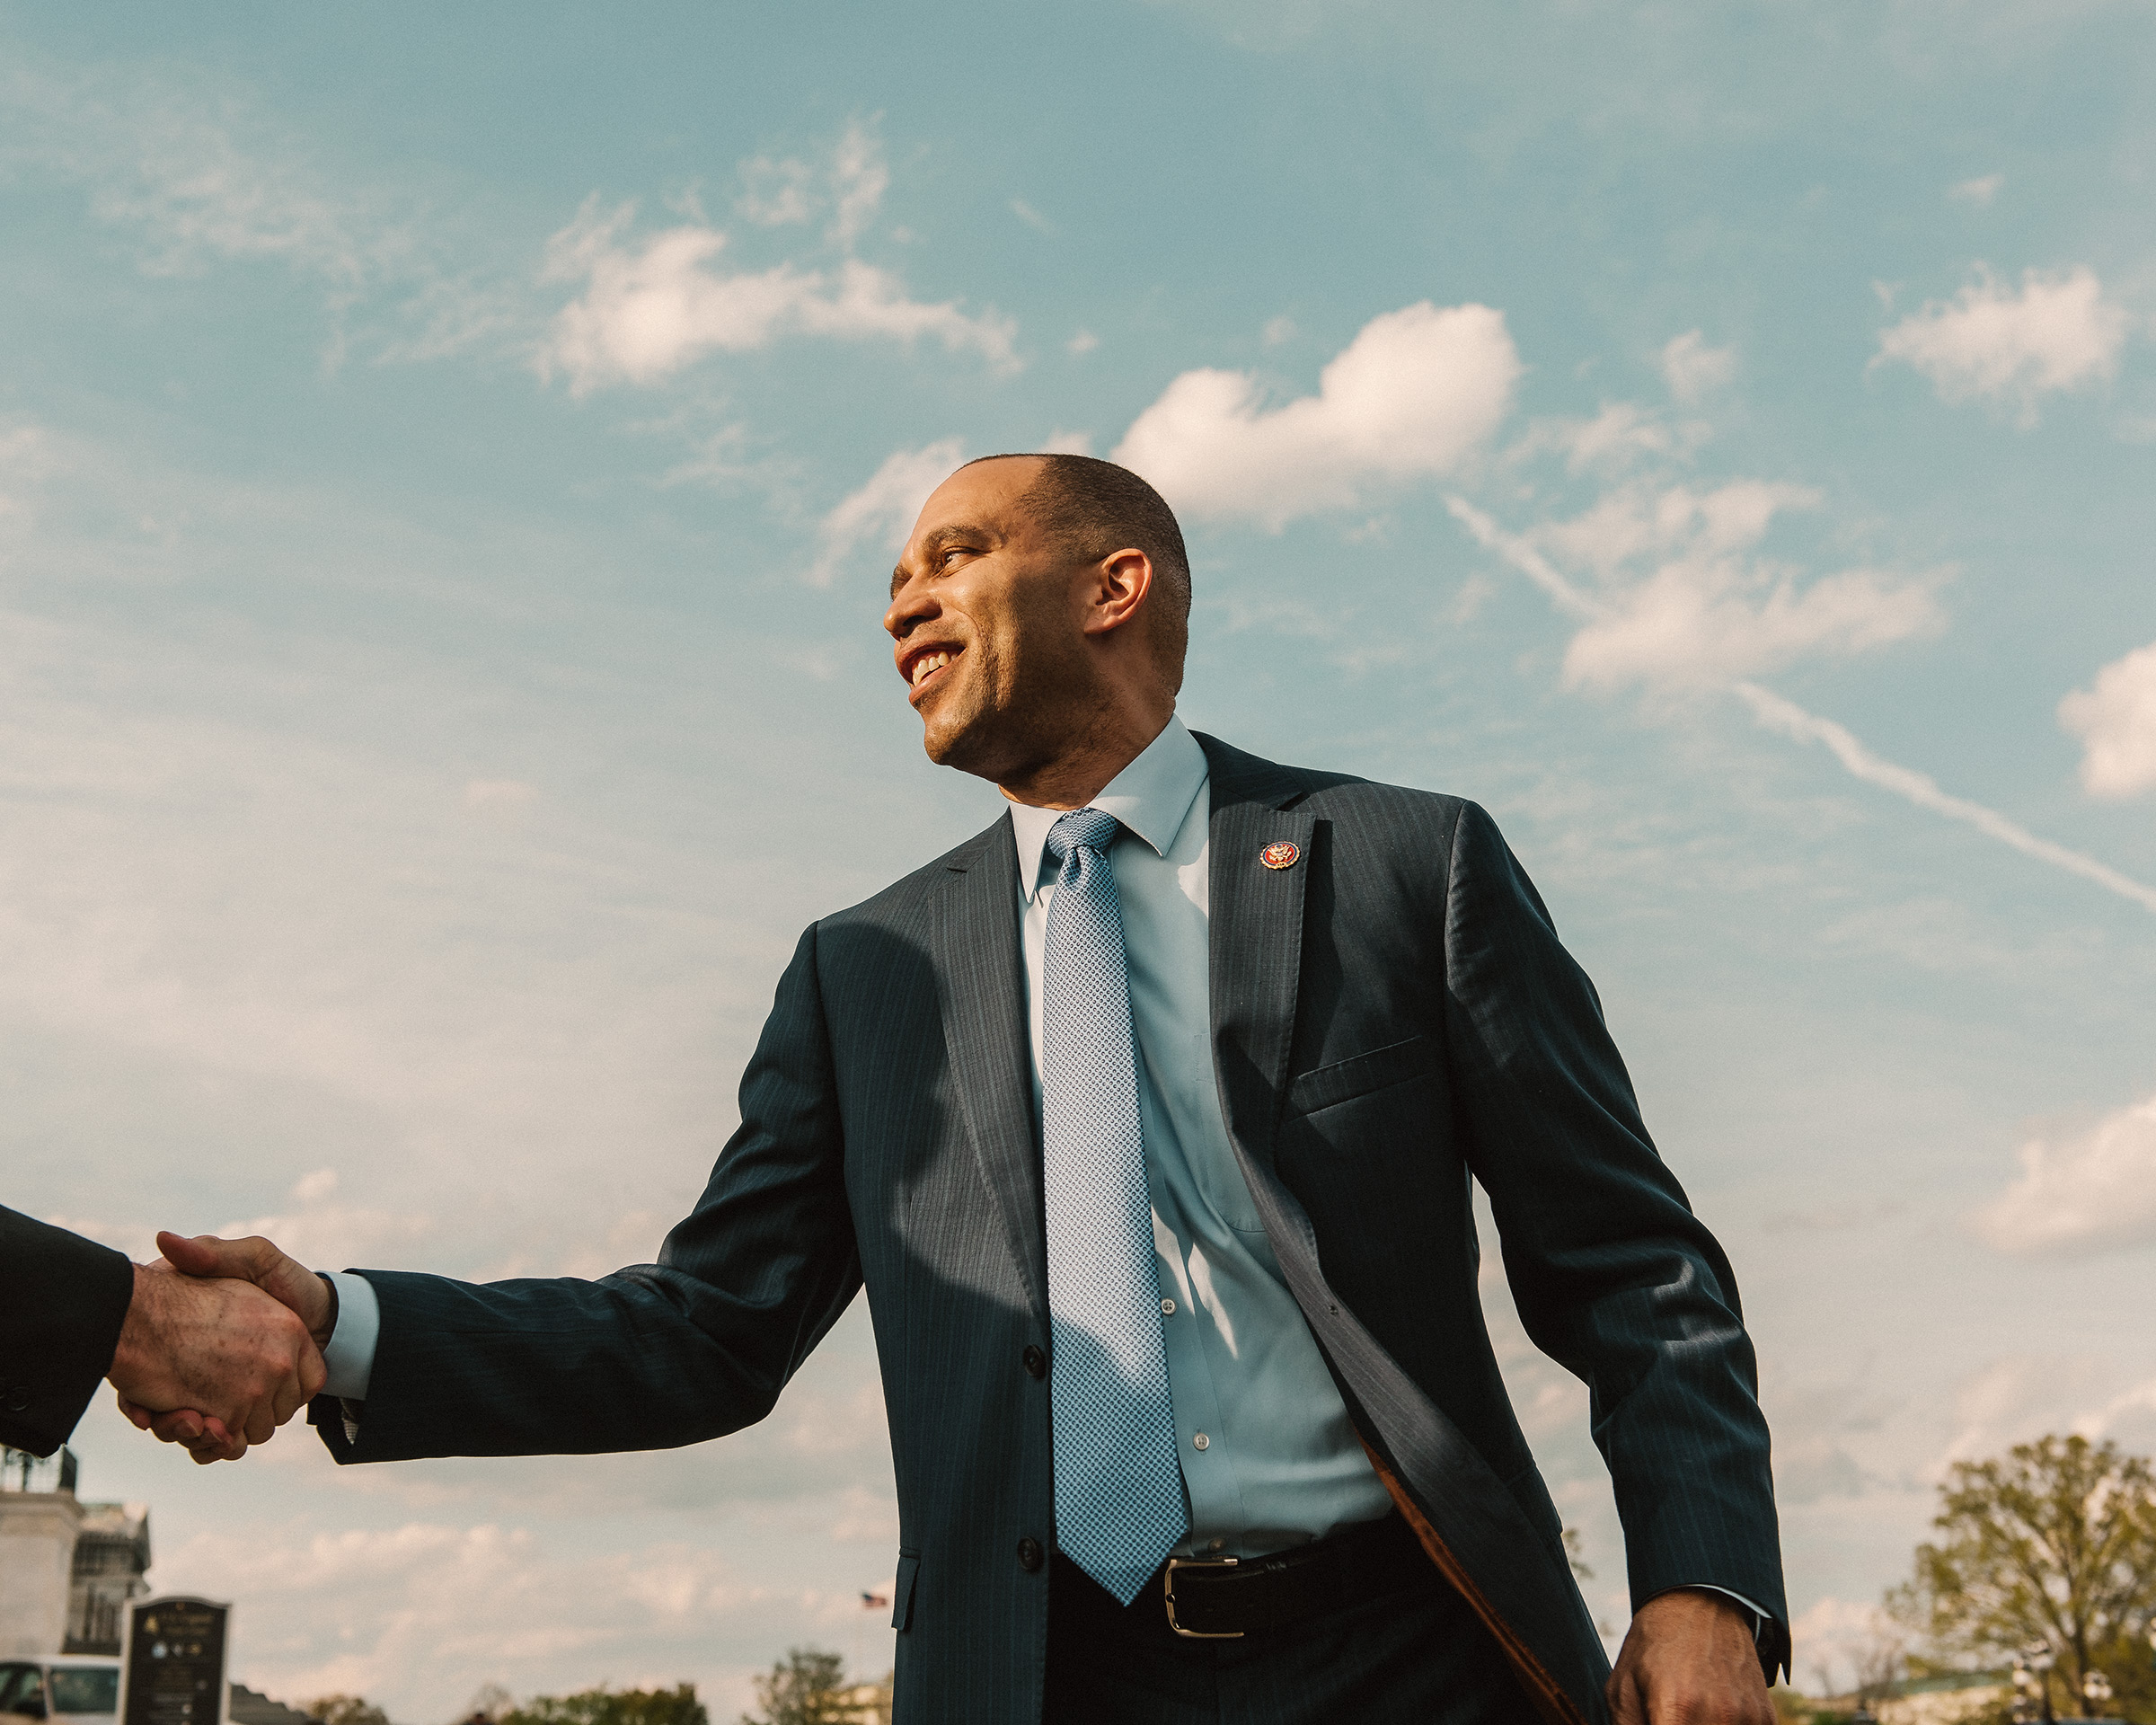 Representative Hakeem Jeffries on Capitol Hill in Washington, D.C. on April 9, 2019. (Jared Soares for TIME)